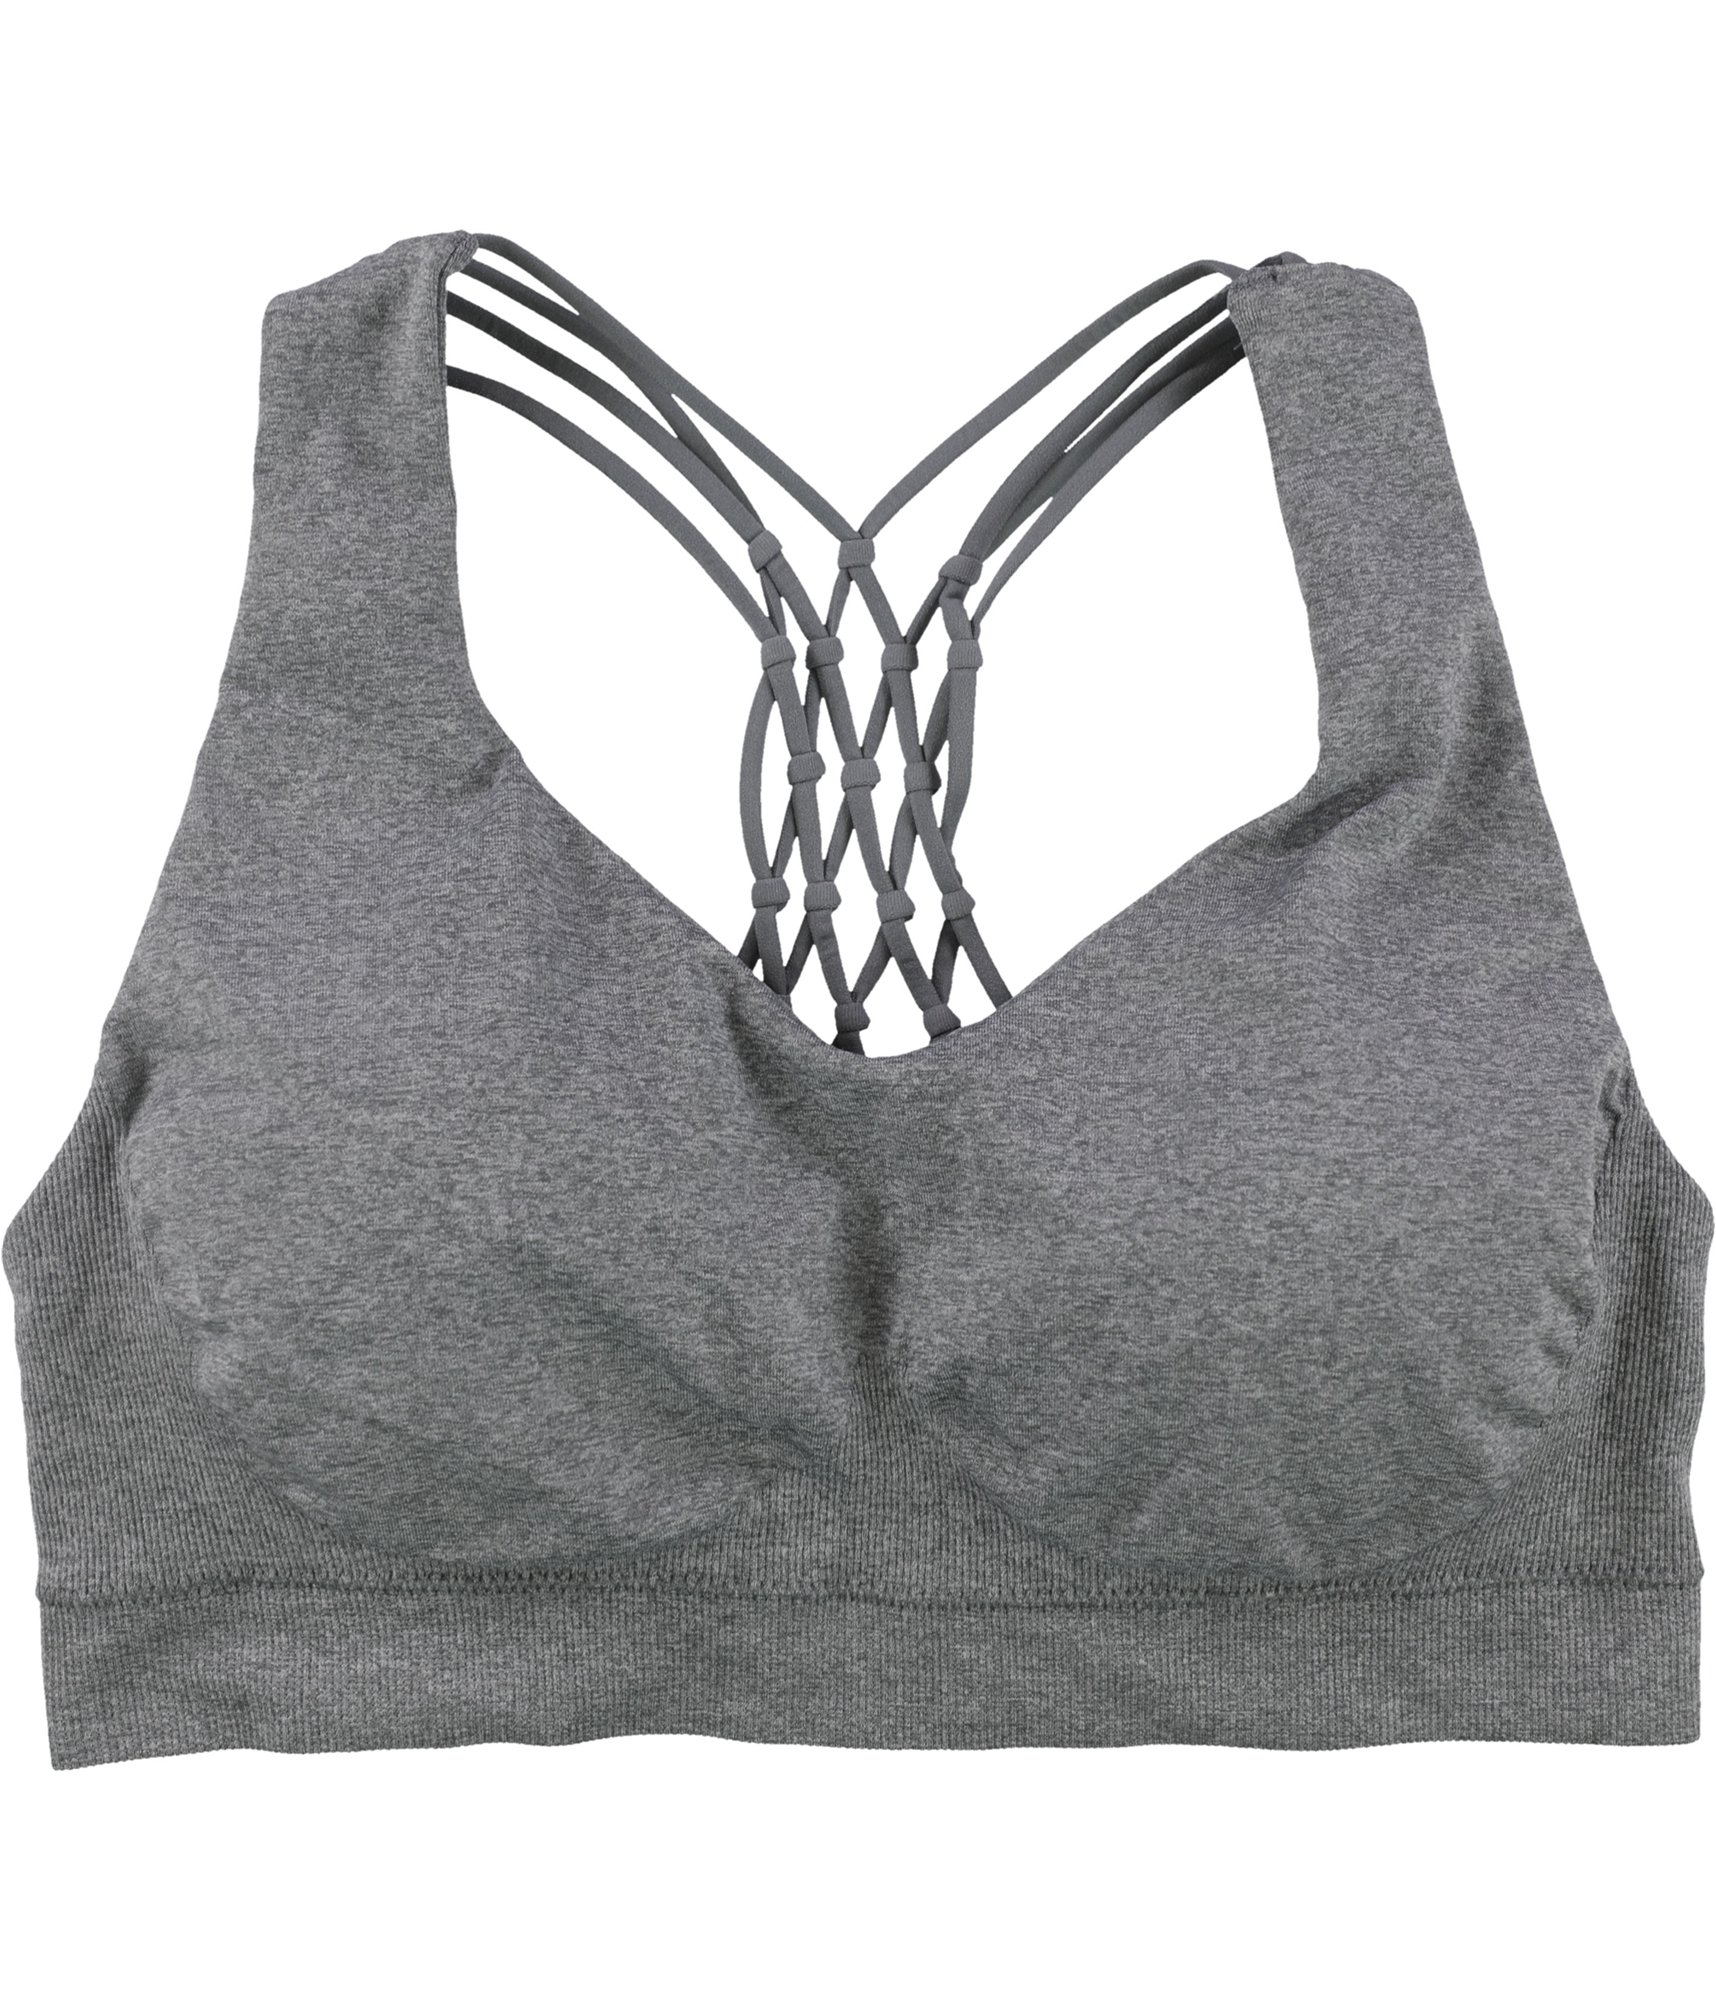 NWT All in Motion Target Small High Support Seamless Bonded Sports Bra Gray